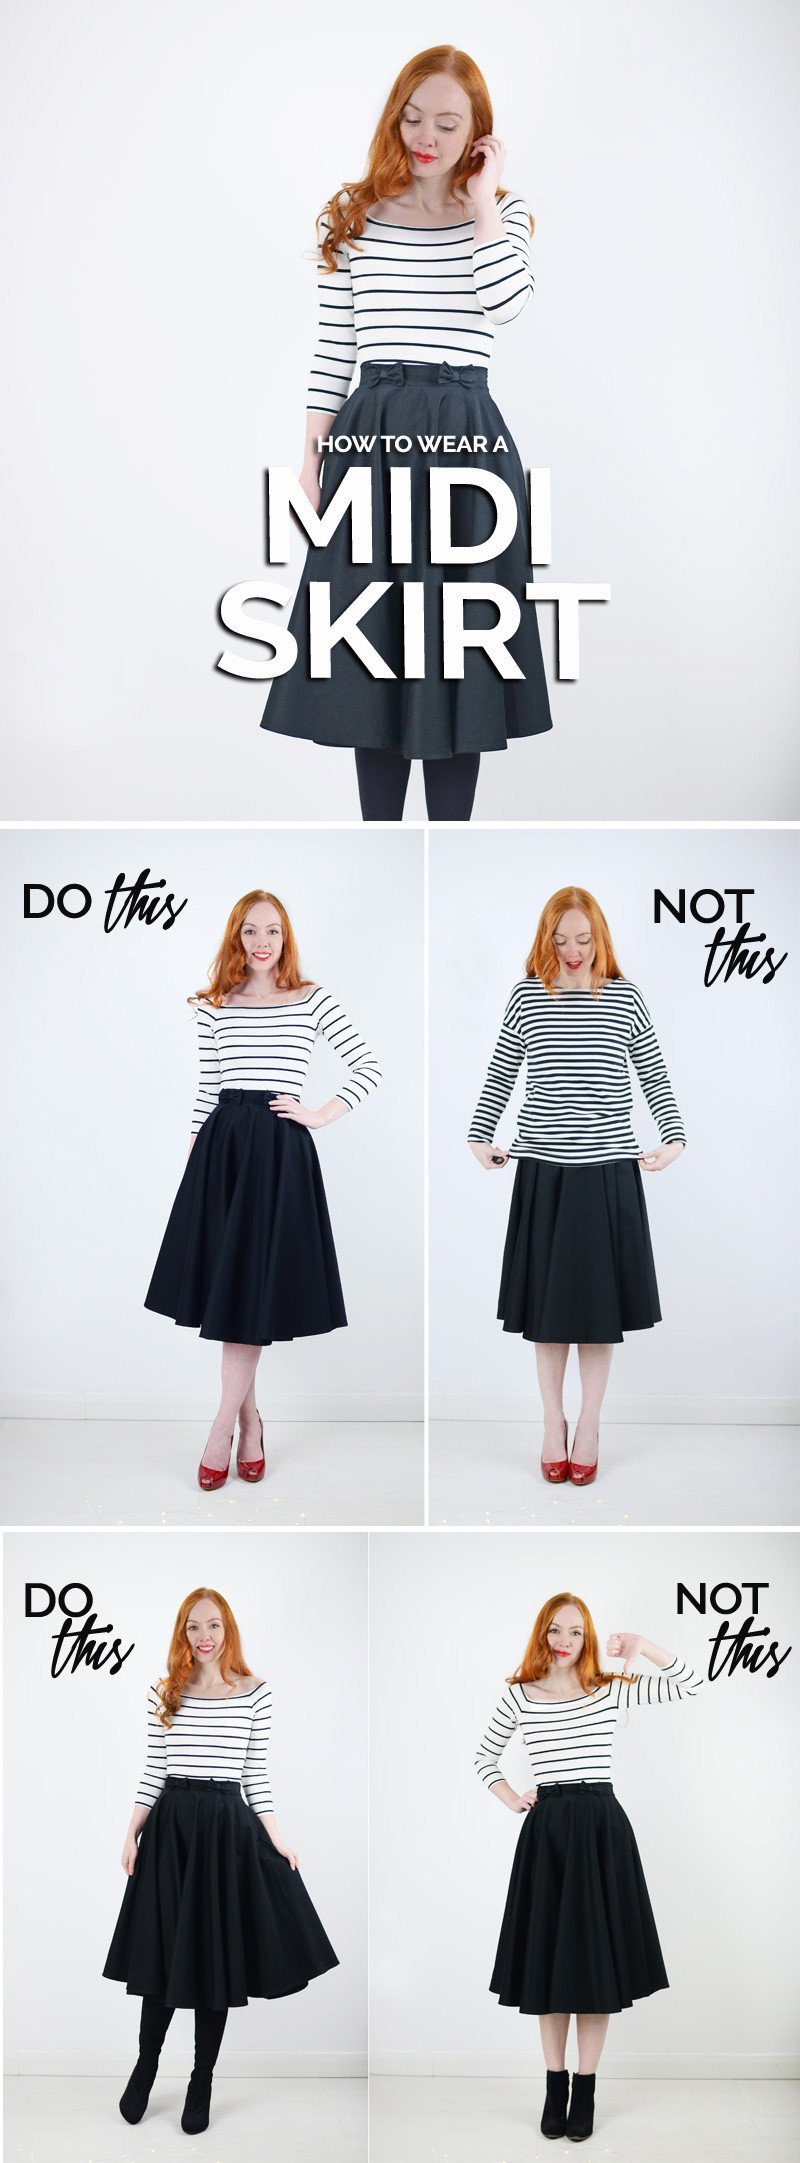 how to wear a midi skirt - and how not to wear one